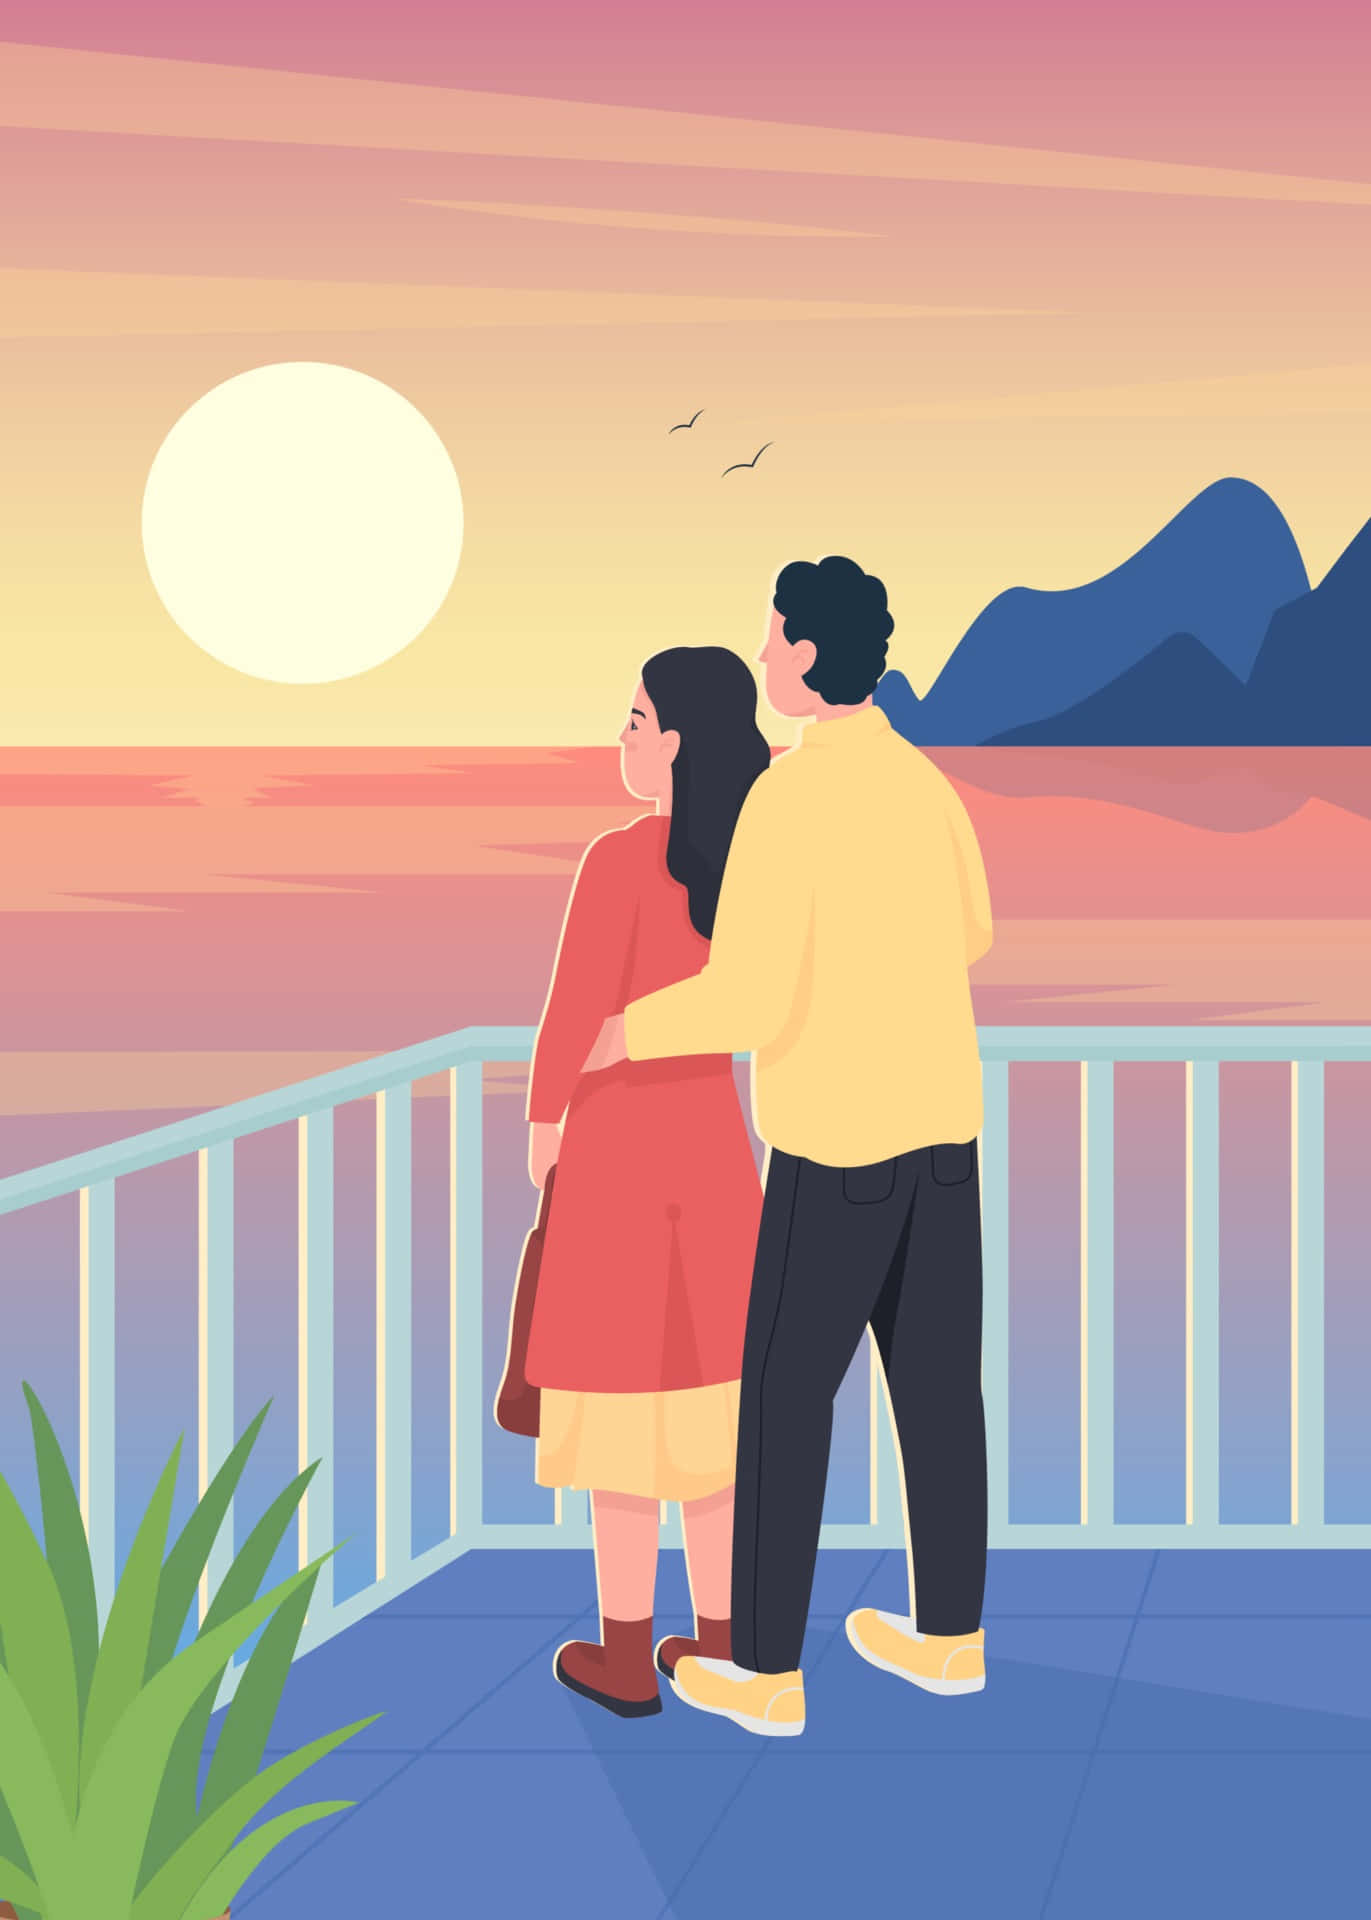 A Dreamy Bay Sunset with a Loving Couple